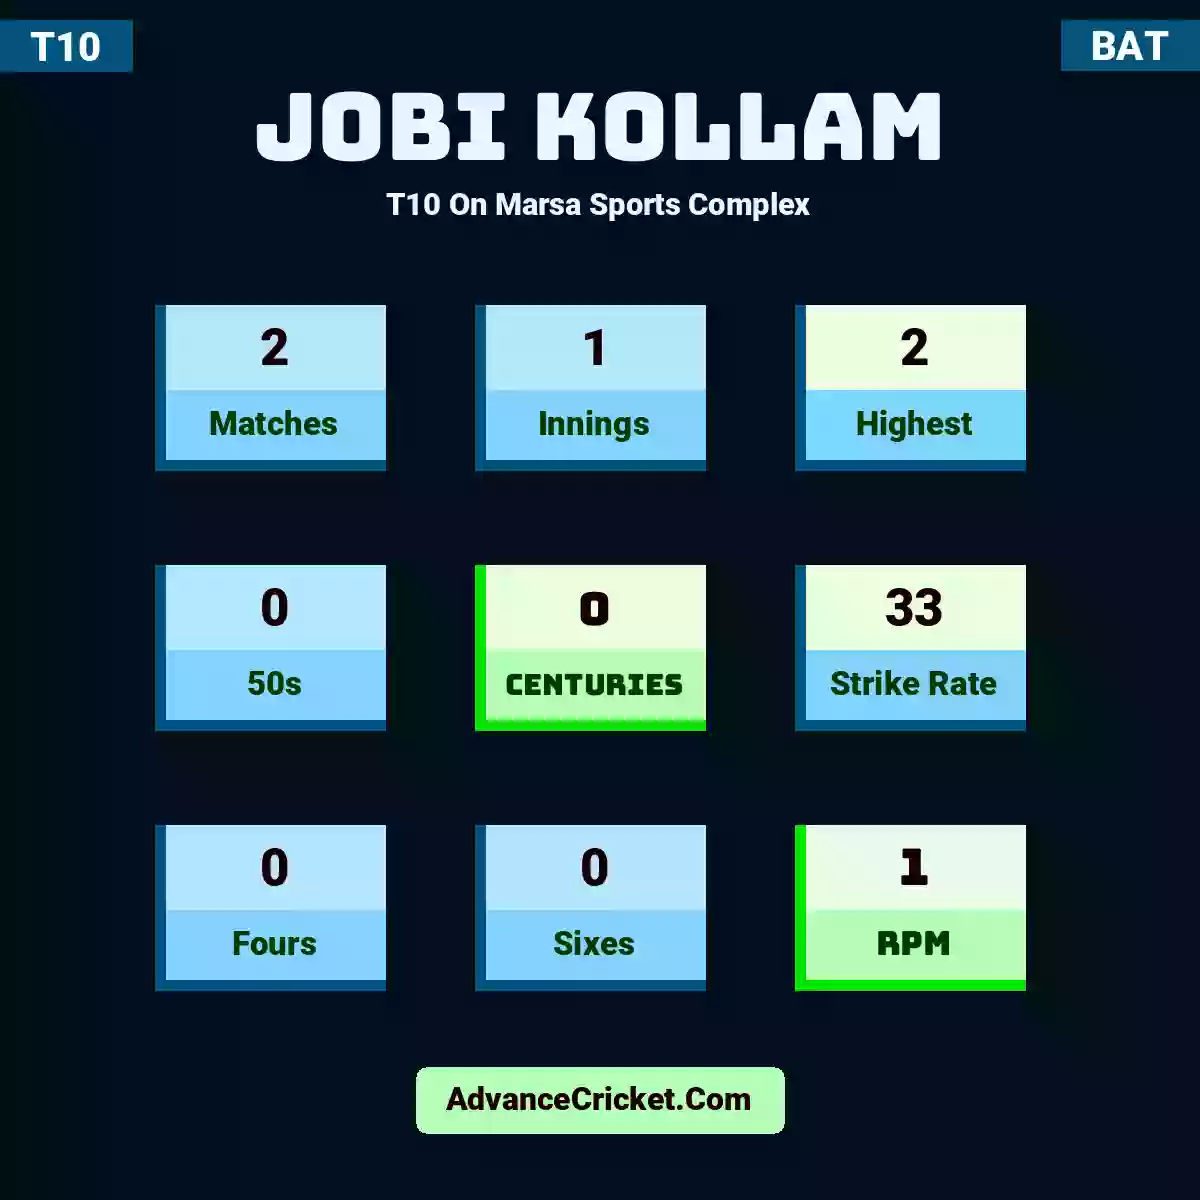 Jobi Kollam T10  On Marsa Sports Complex, Jobi Kollam played 2 matches, scored 2 runs as highest, 0 half-centuries, and 0 centuries, with a strike rate of 33. J.Kollam hit 0 fours and 0 sixes, with an RPM of 1.